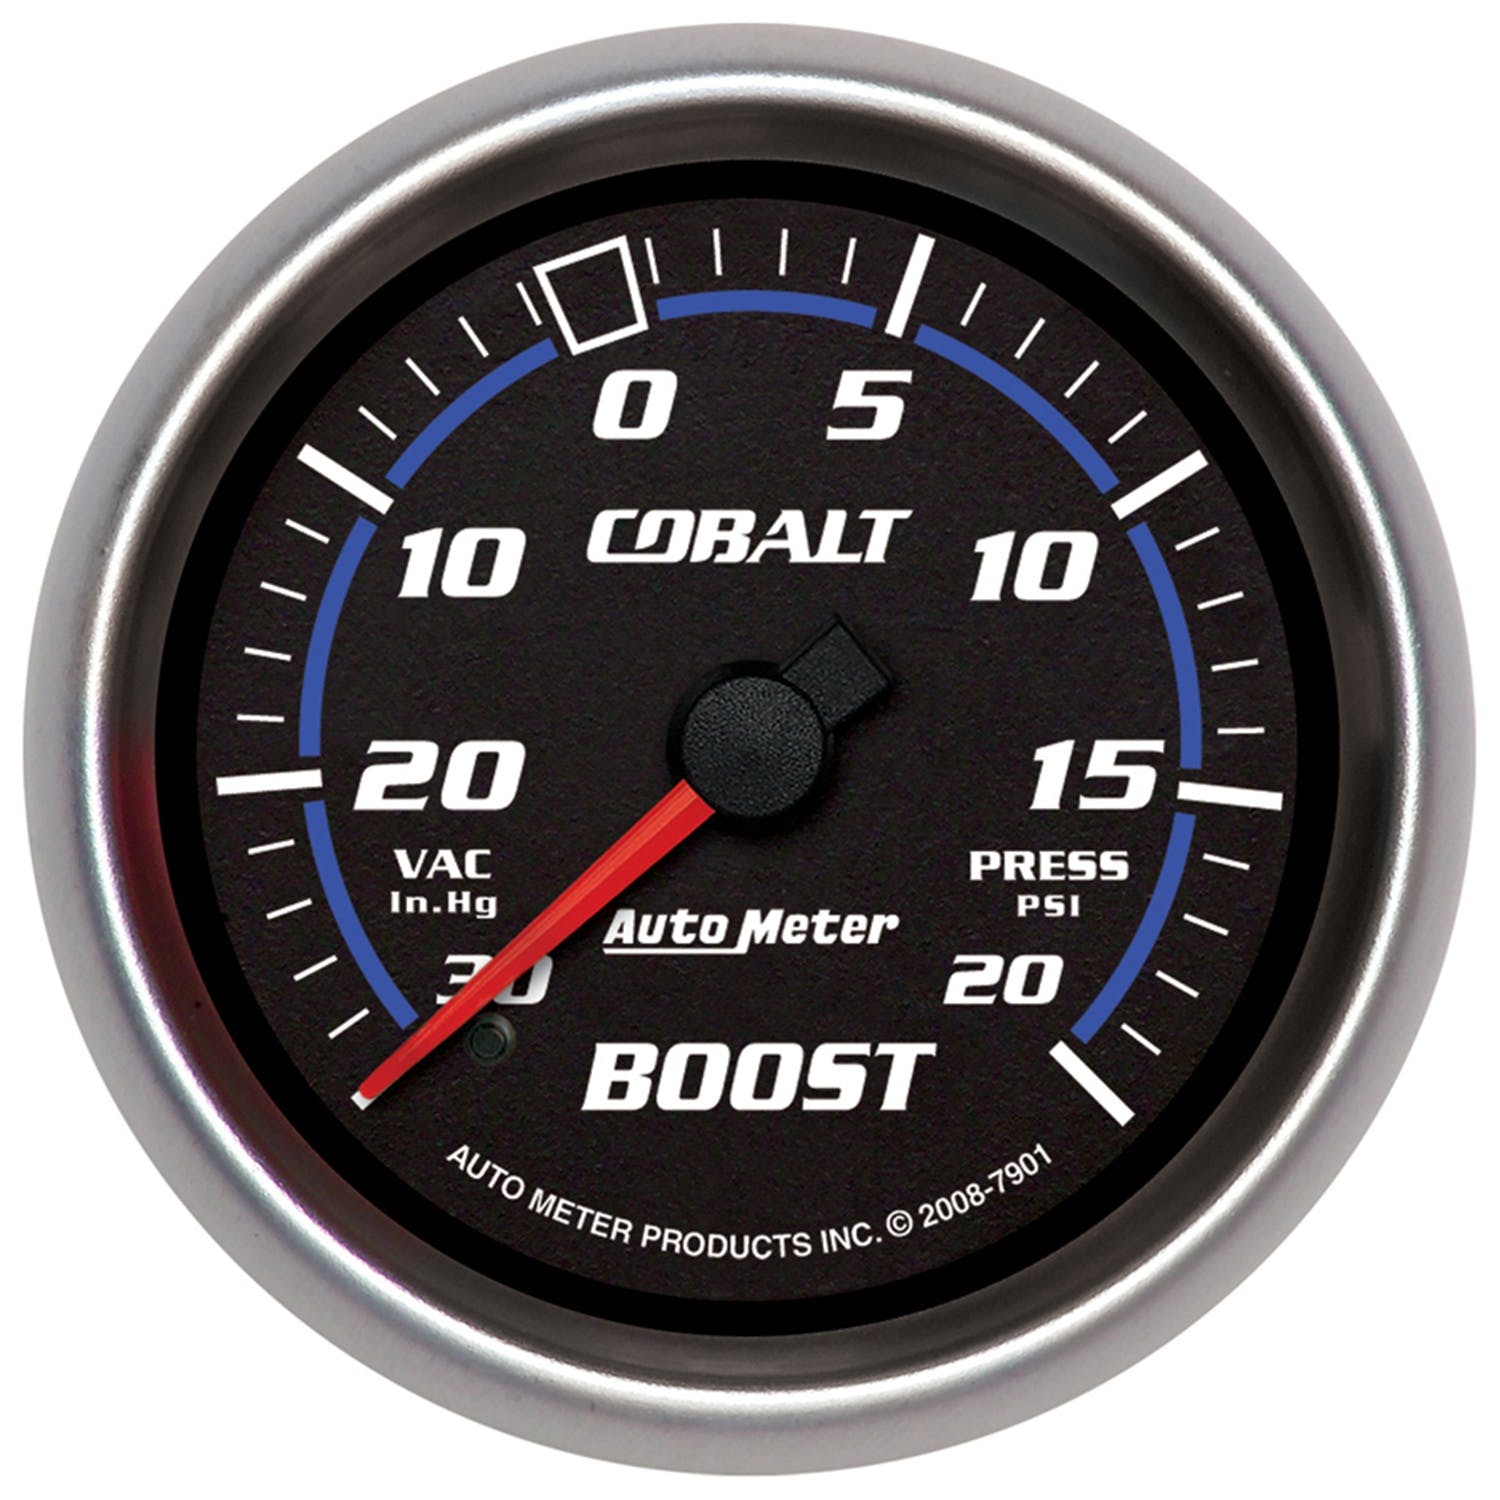 AutoMeter Products 7901 2-5/8in BOOST-VAC, 30 IN. HG/20 PSI, Mech, Cobalt